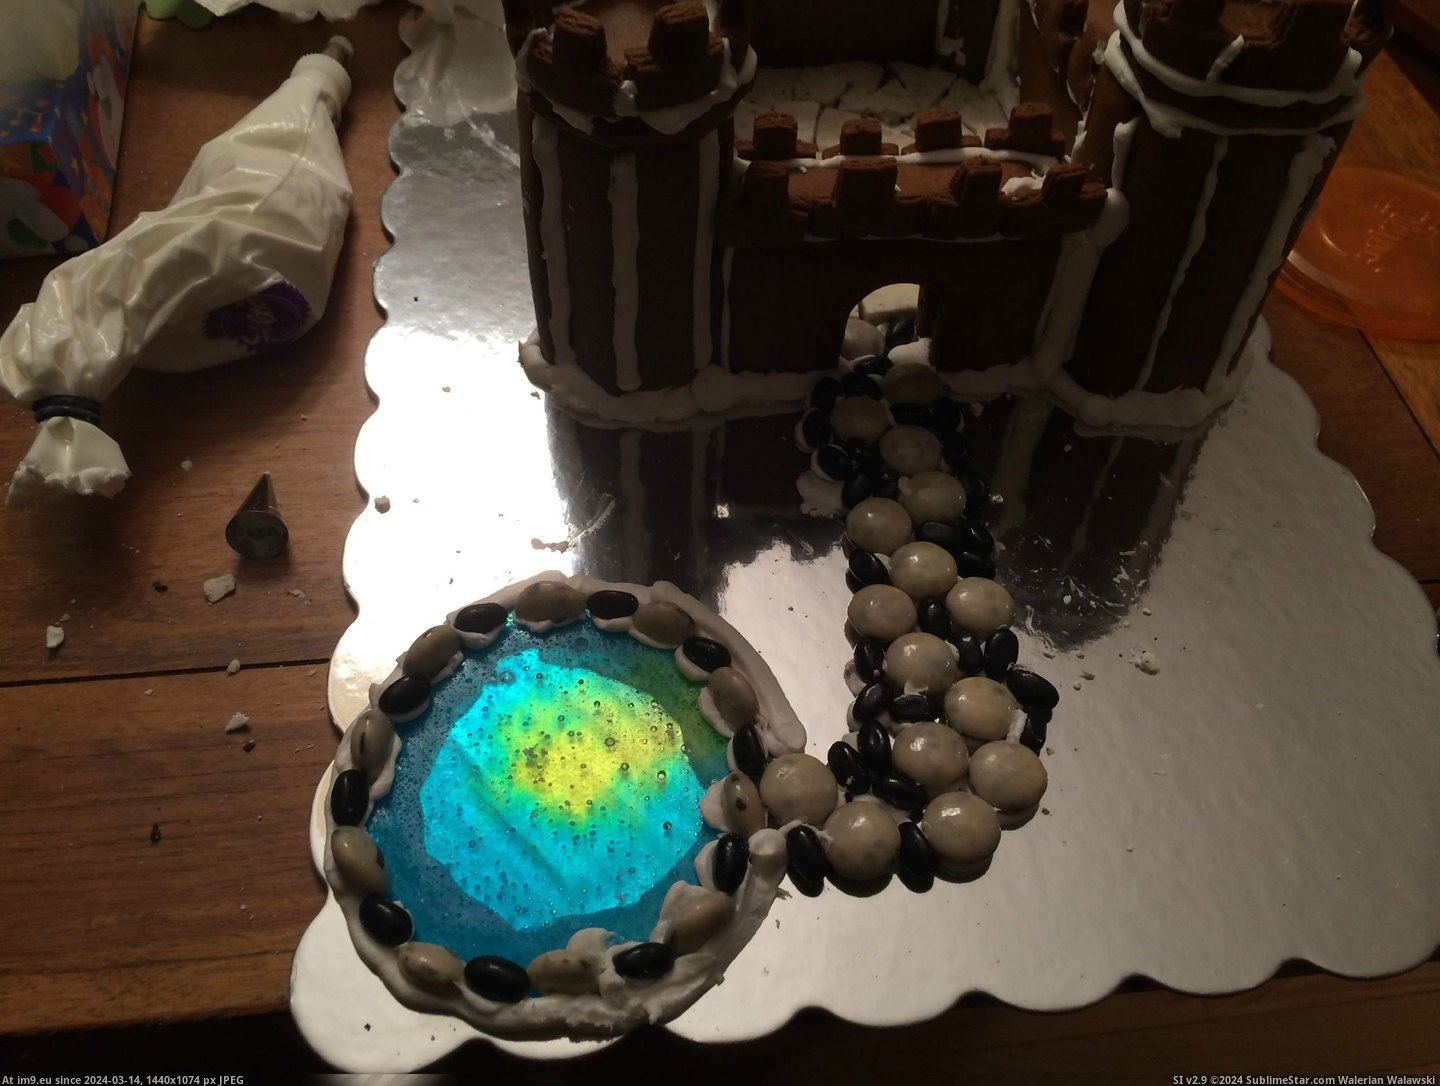 #Husband #Get #Our #Divorced #Collaborated #Project #Gingerbread #Success [Pics] My husband and I collaborated on our first gingerbread project and didn't get divorced...success! 18 Pic. (Изображение из альбом My r/PICS favs))